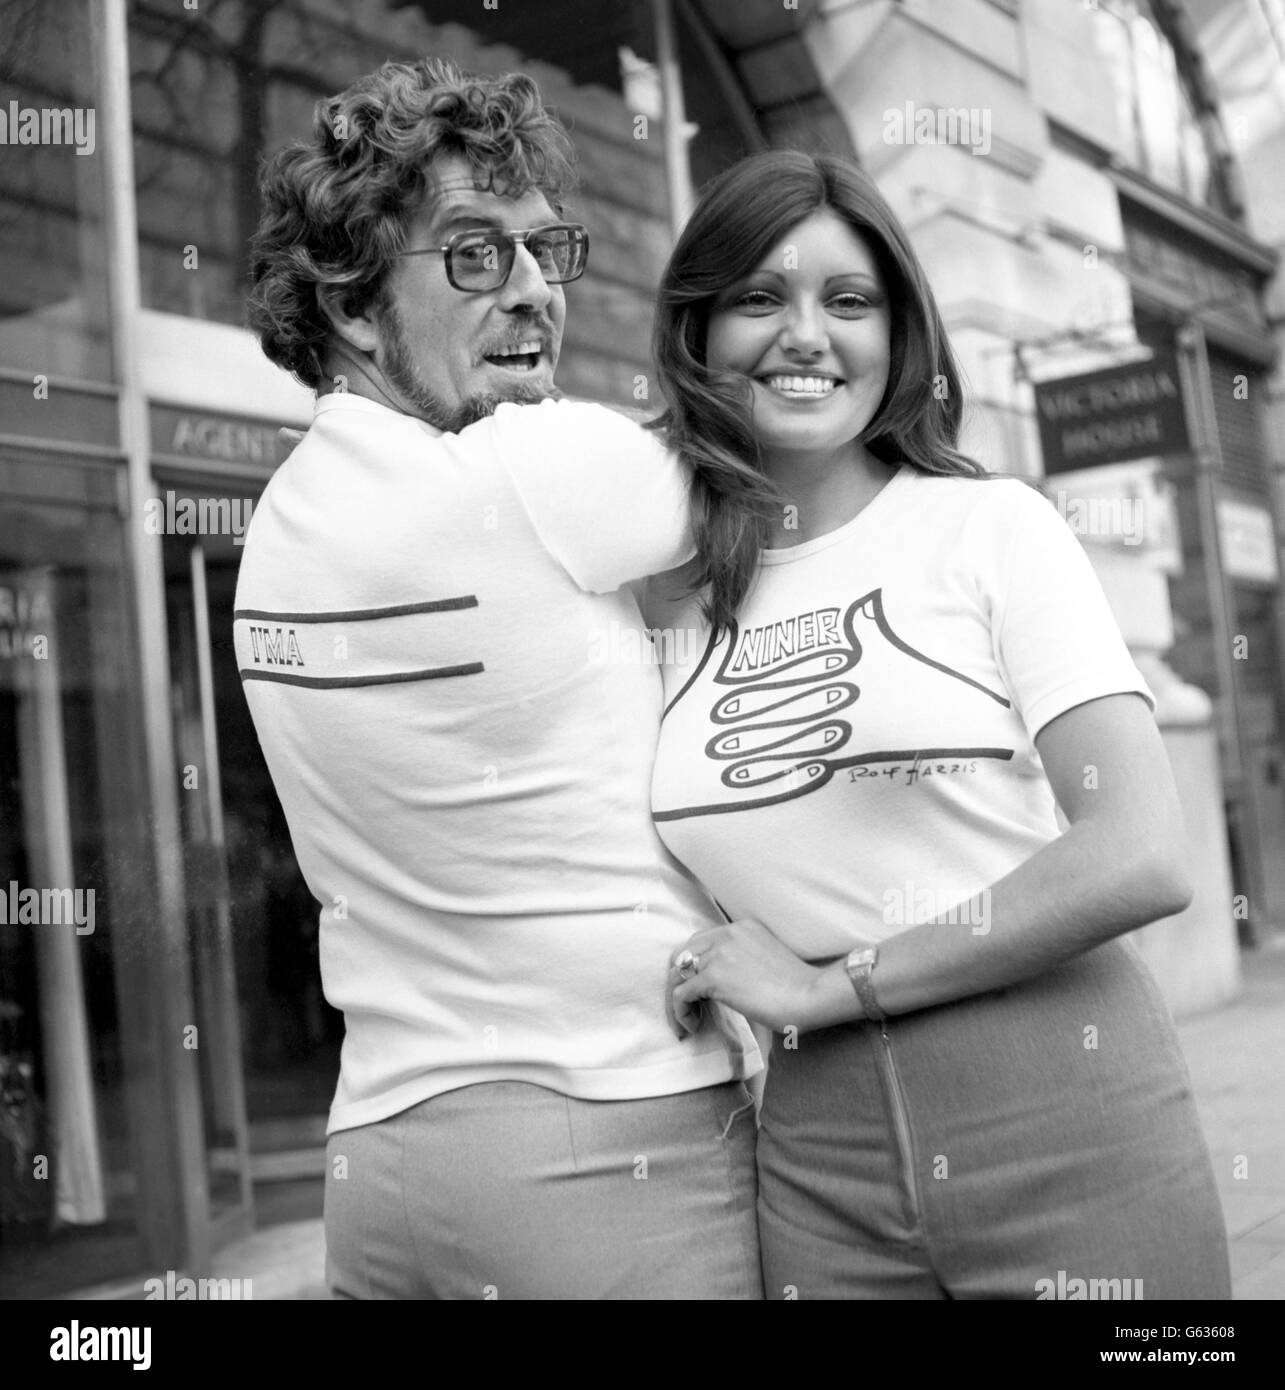 Miss Australia, Karen Pini, and her compatriot Rolf Harris outside Australia House in London's Strand, where they handed over a T-shirt designed by Rolf for the Niner Club, founded by British musician Bill McGuffie. The aim of the club, of which Karen is an honorary member, is to organise functions to raise money for autistic children. Stock Photo